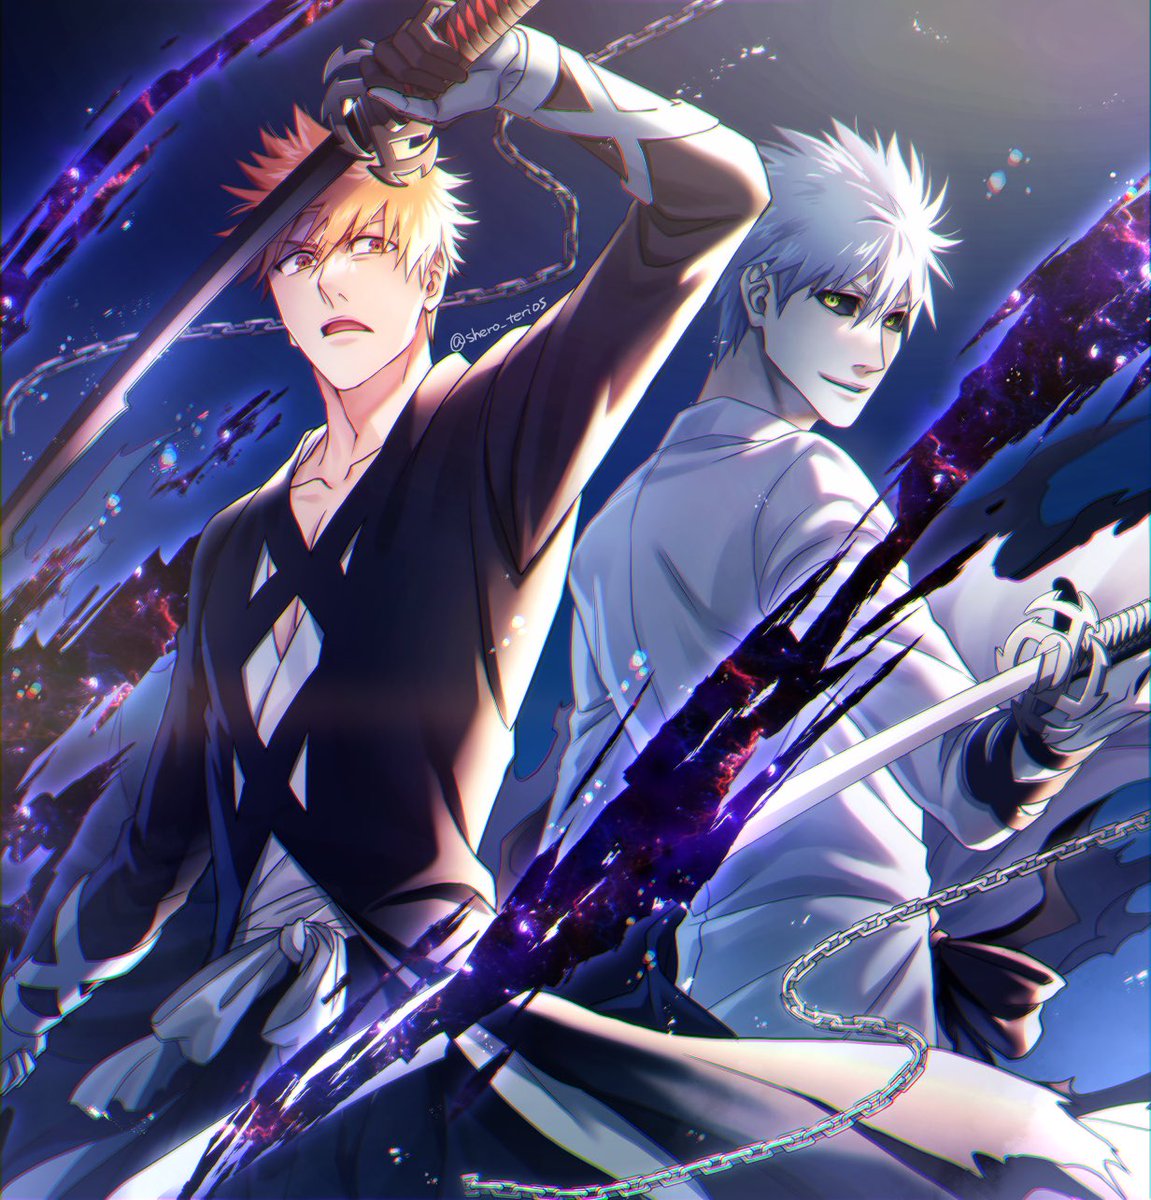 2boys multiple boys weapon sword holding male focus holding weapon  illustration images